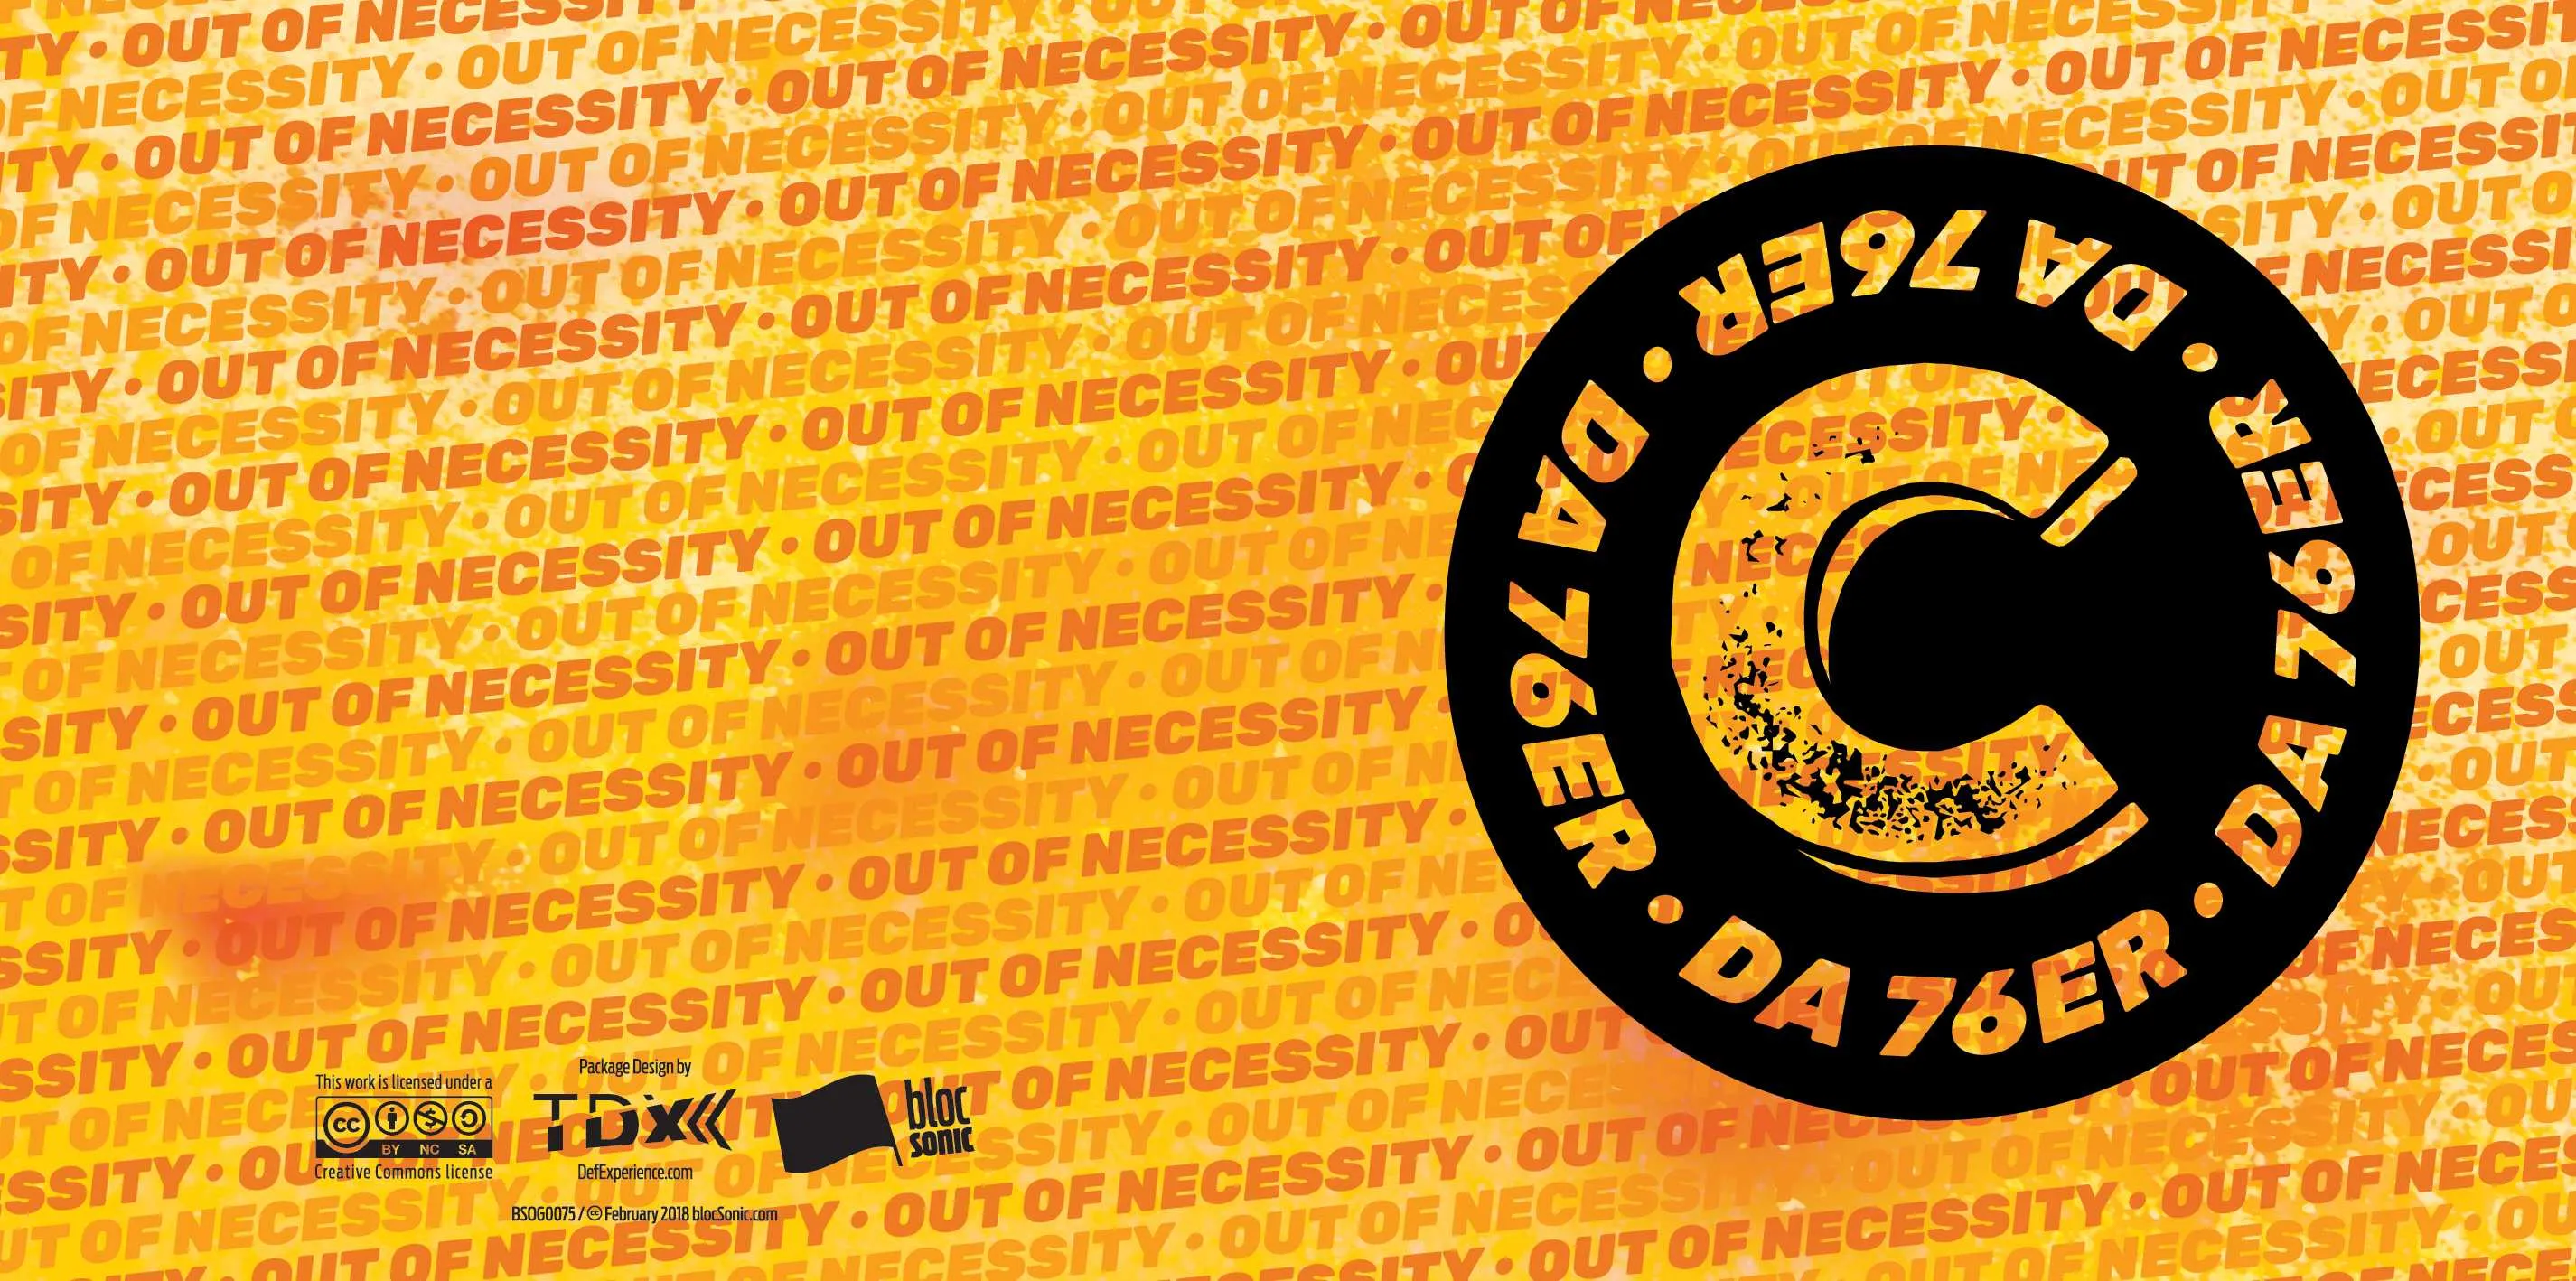 Album insert for “Out of Necessity” by C da 76er